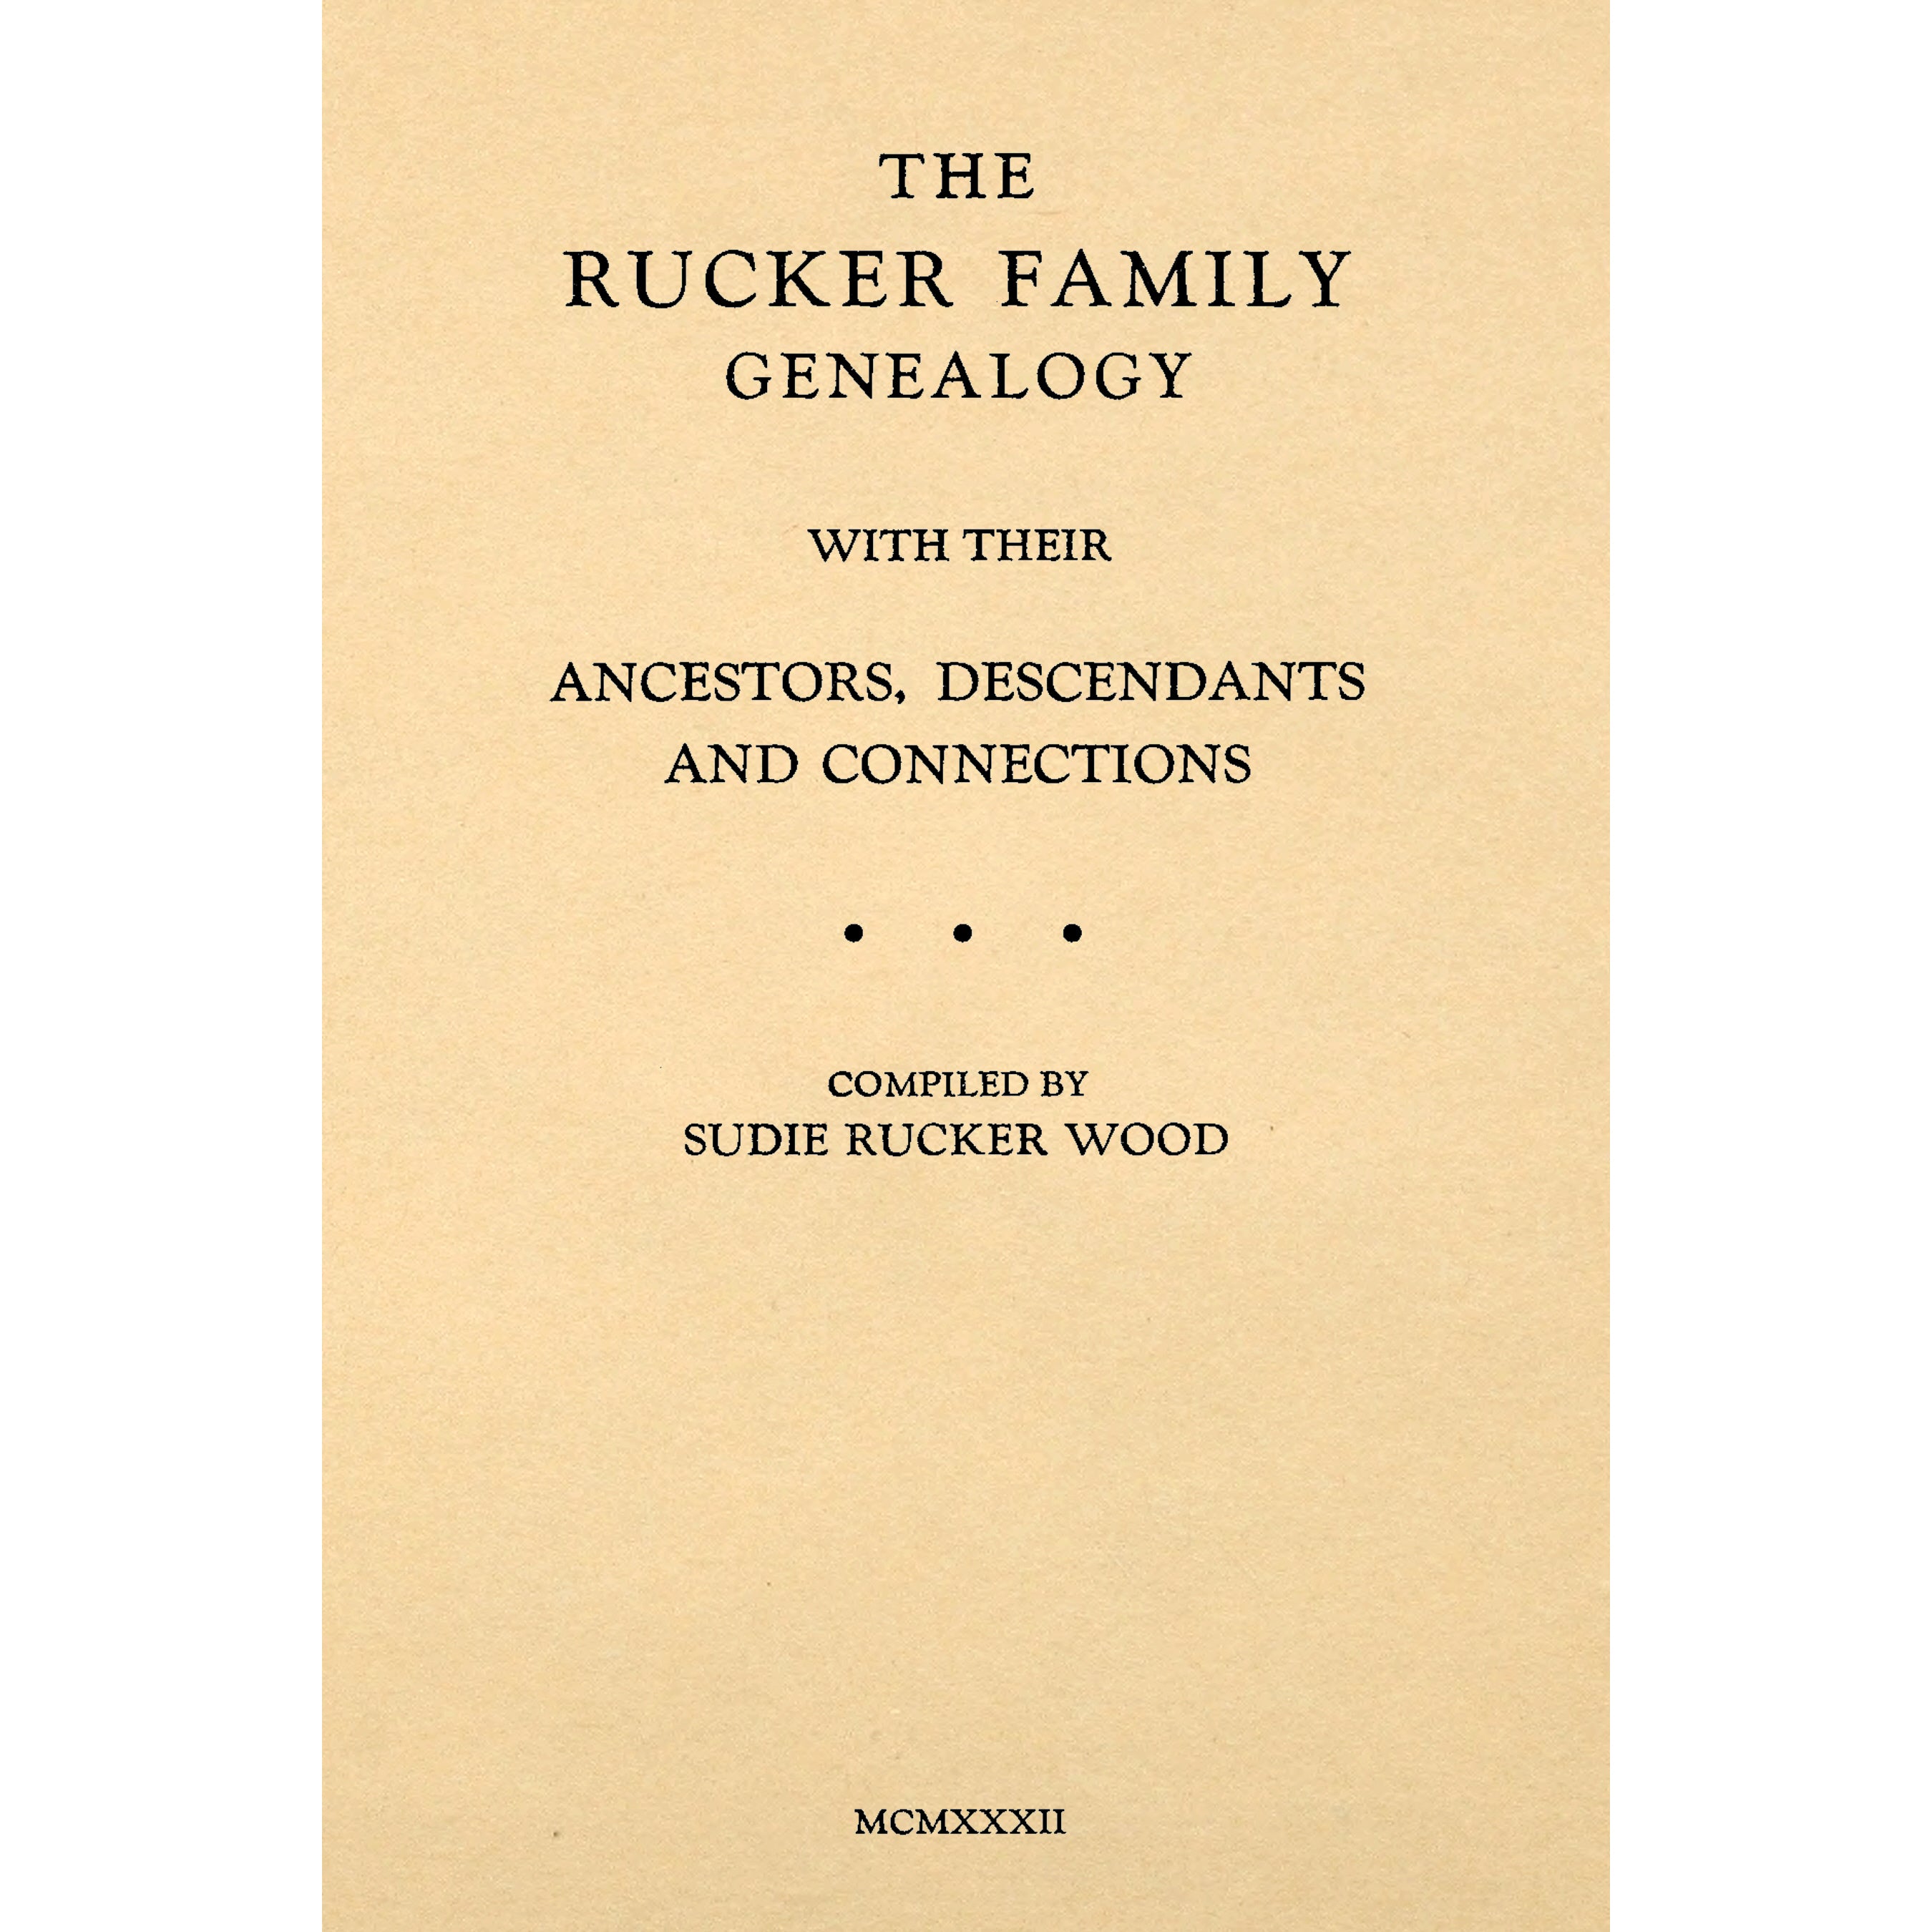 The Rucker Family Genealogy with their Ancestors, Descendants and Connections